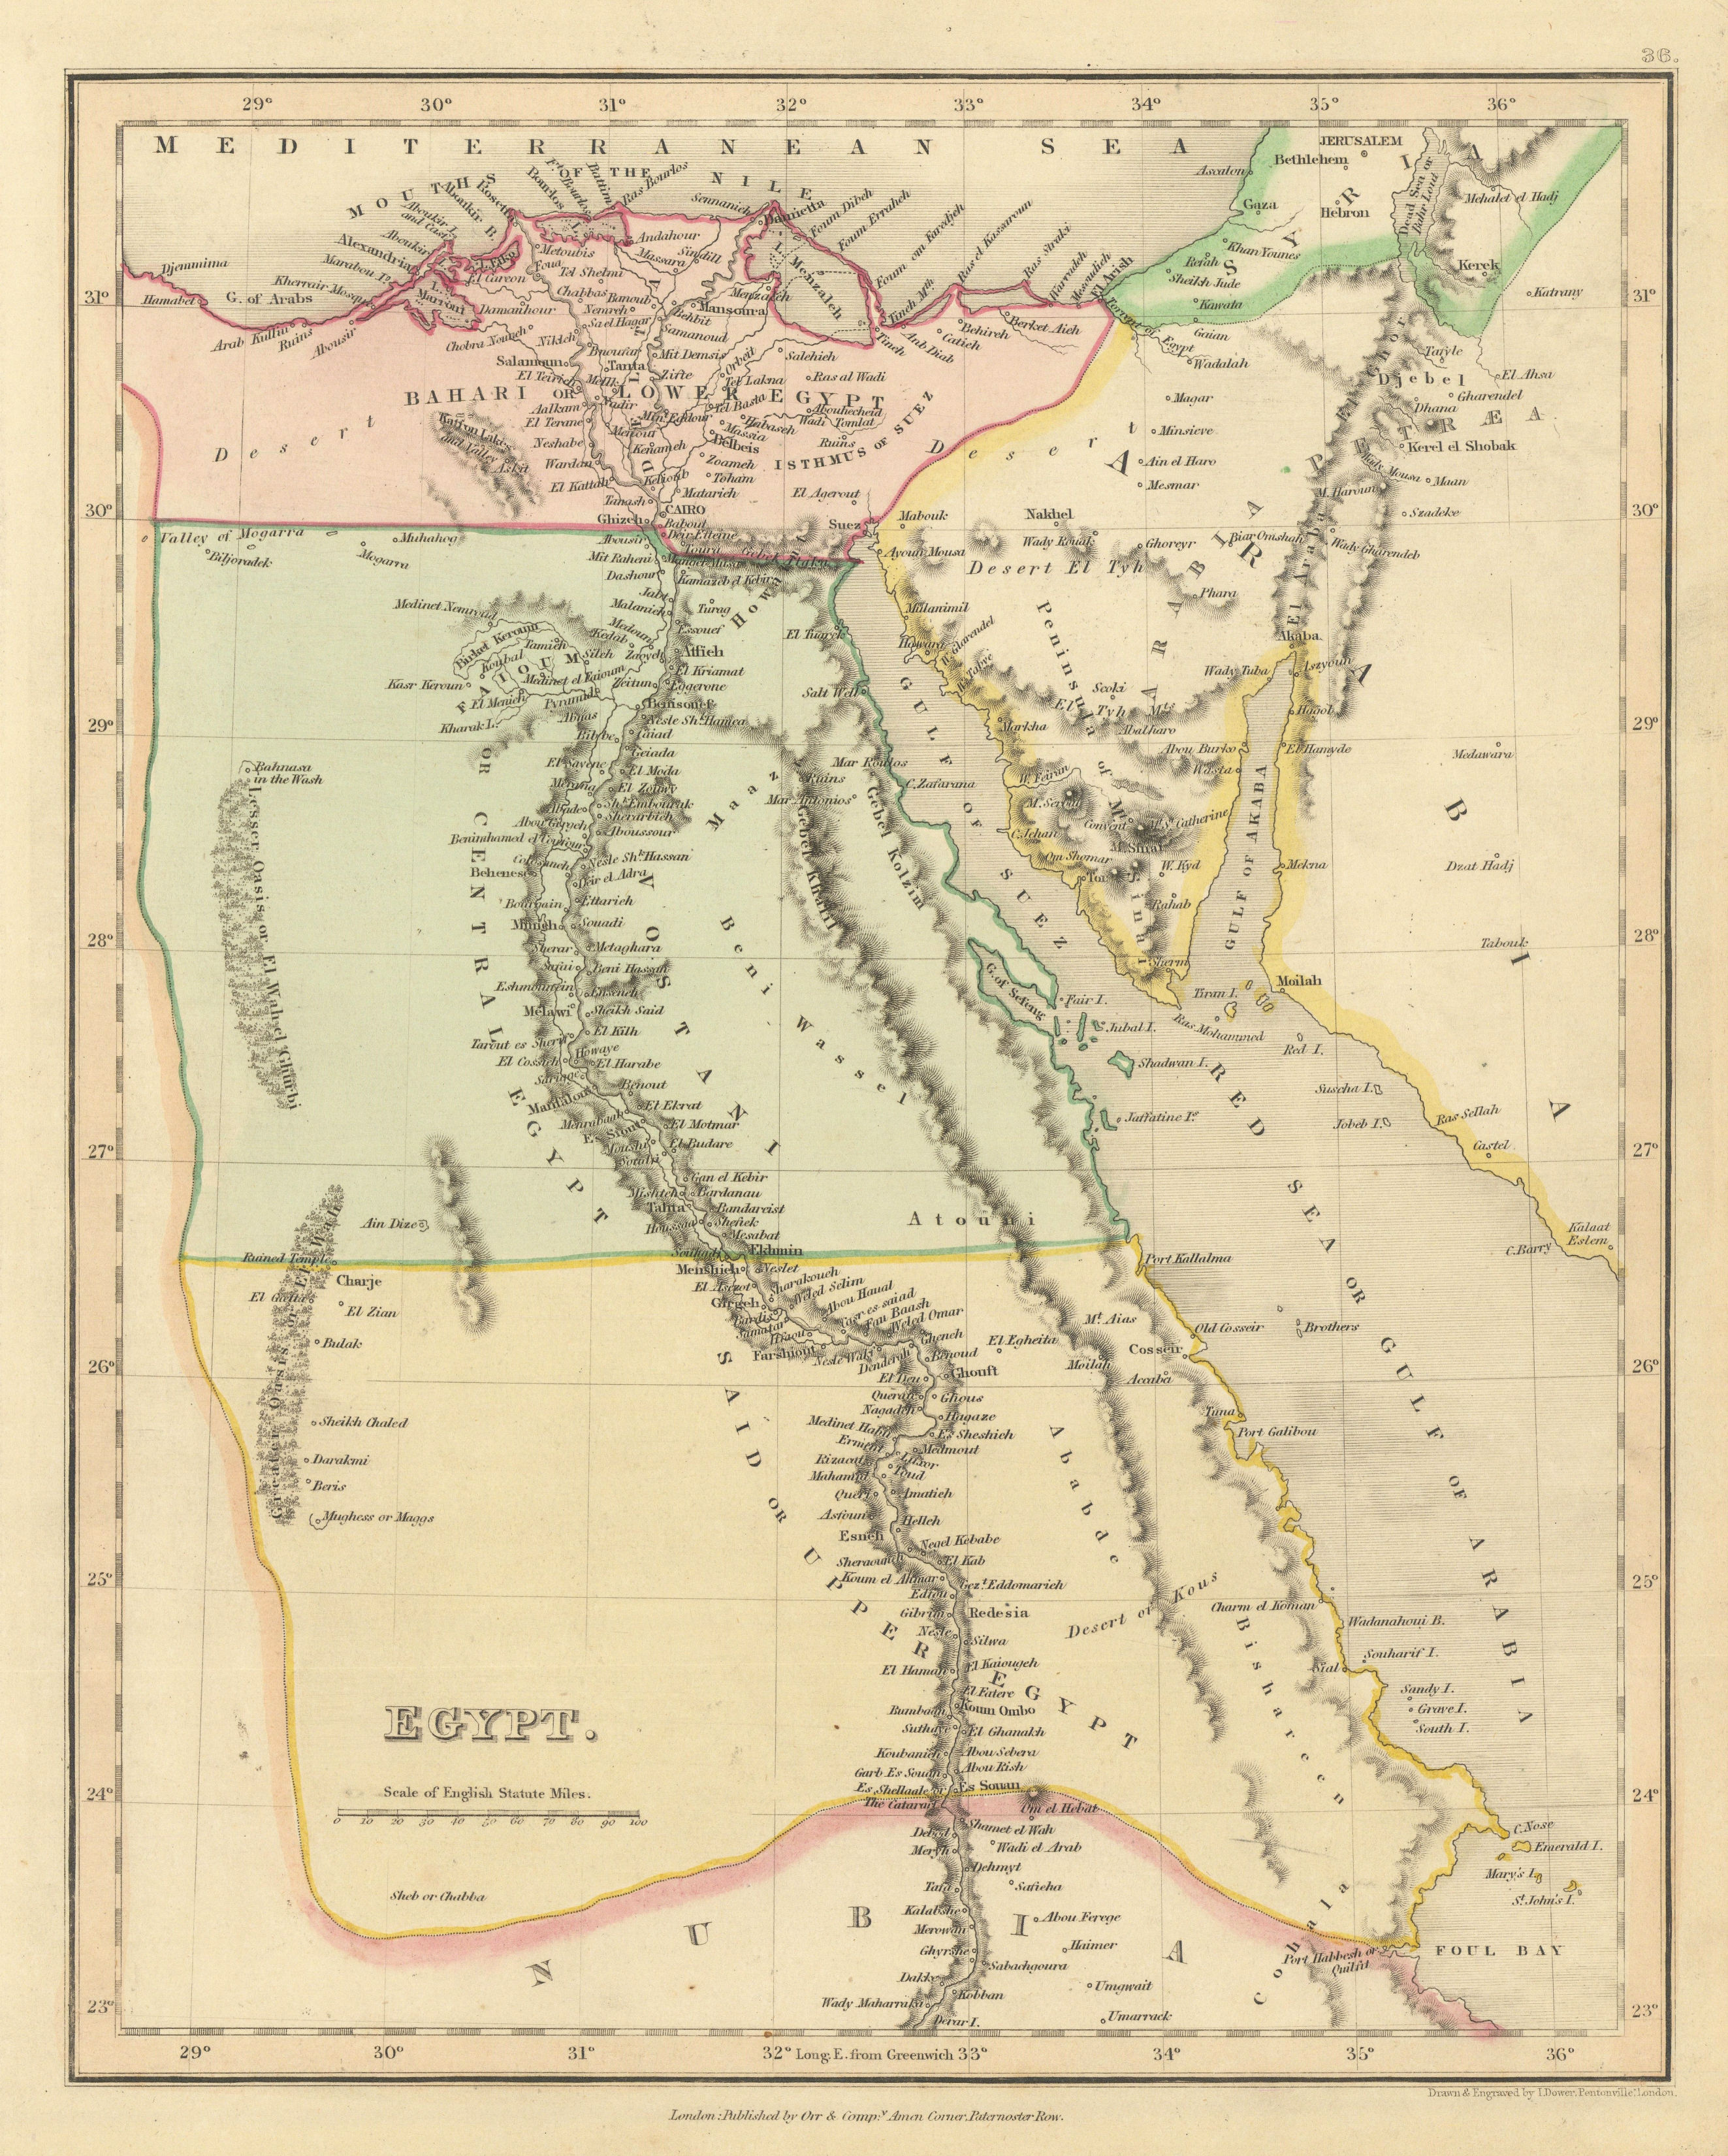 Associate Product Egypt by John Dower. Nile Valley & Red Sea 1845 old antique map plan chart